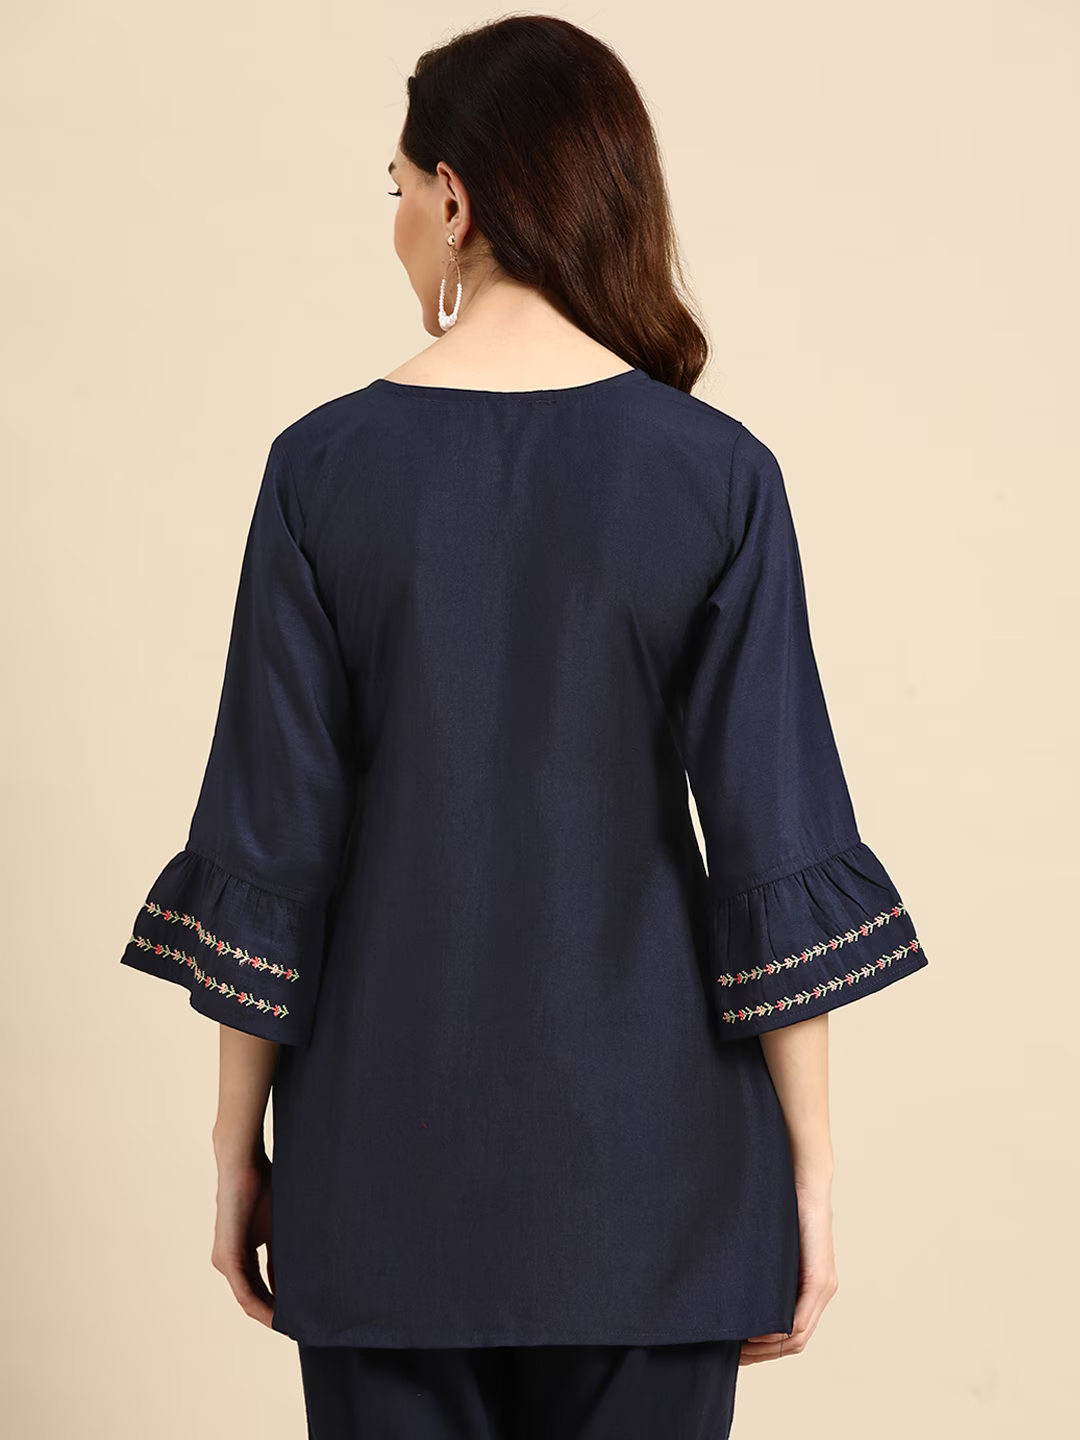 Navy Blue Embroidered Bell Sleeves Longline Top